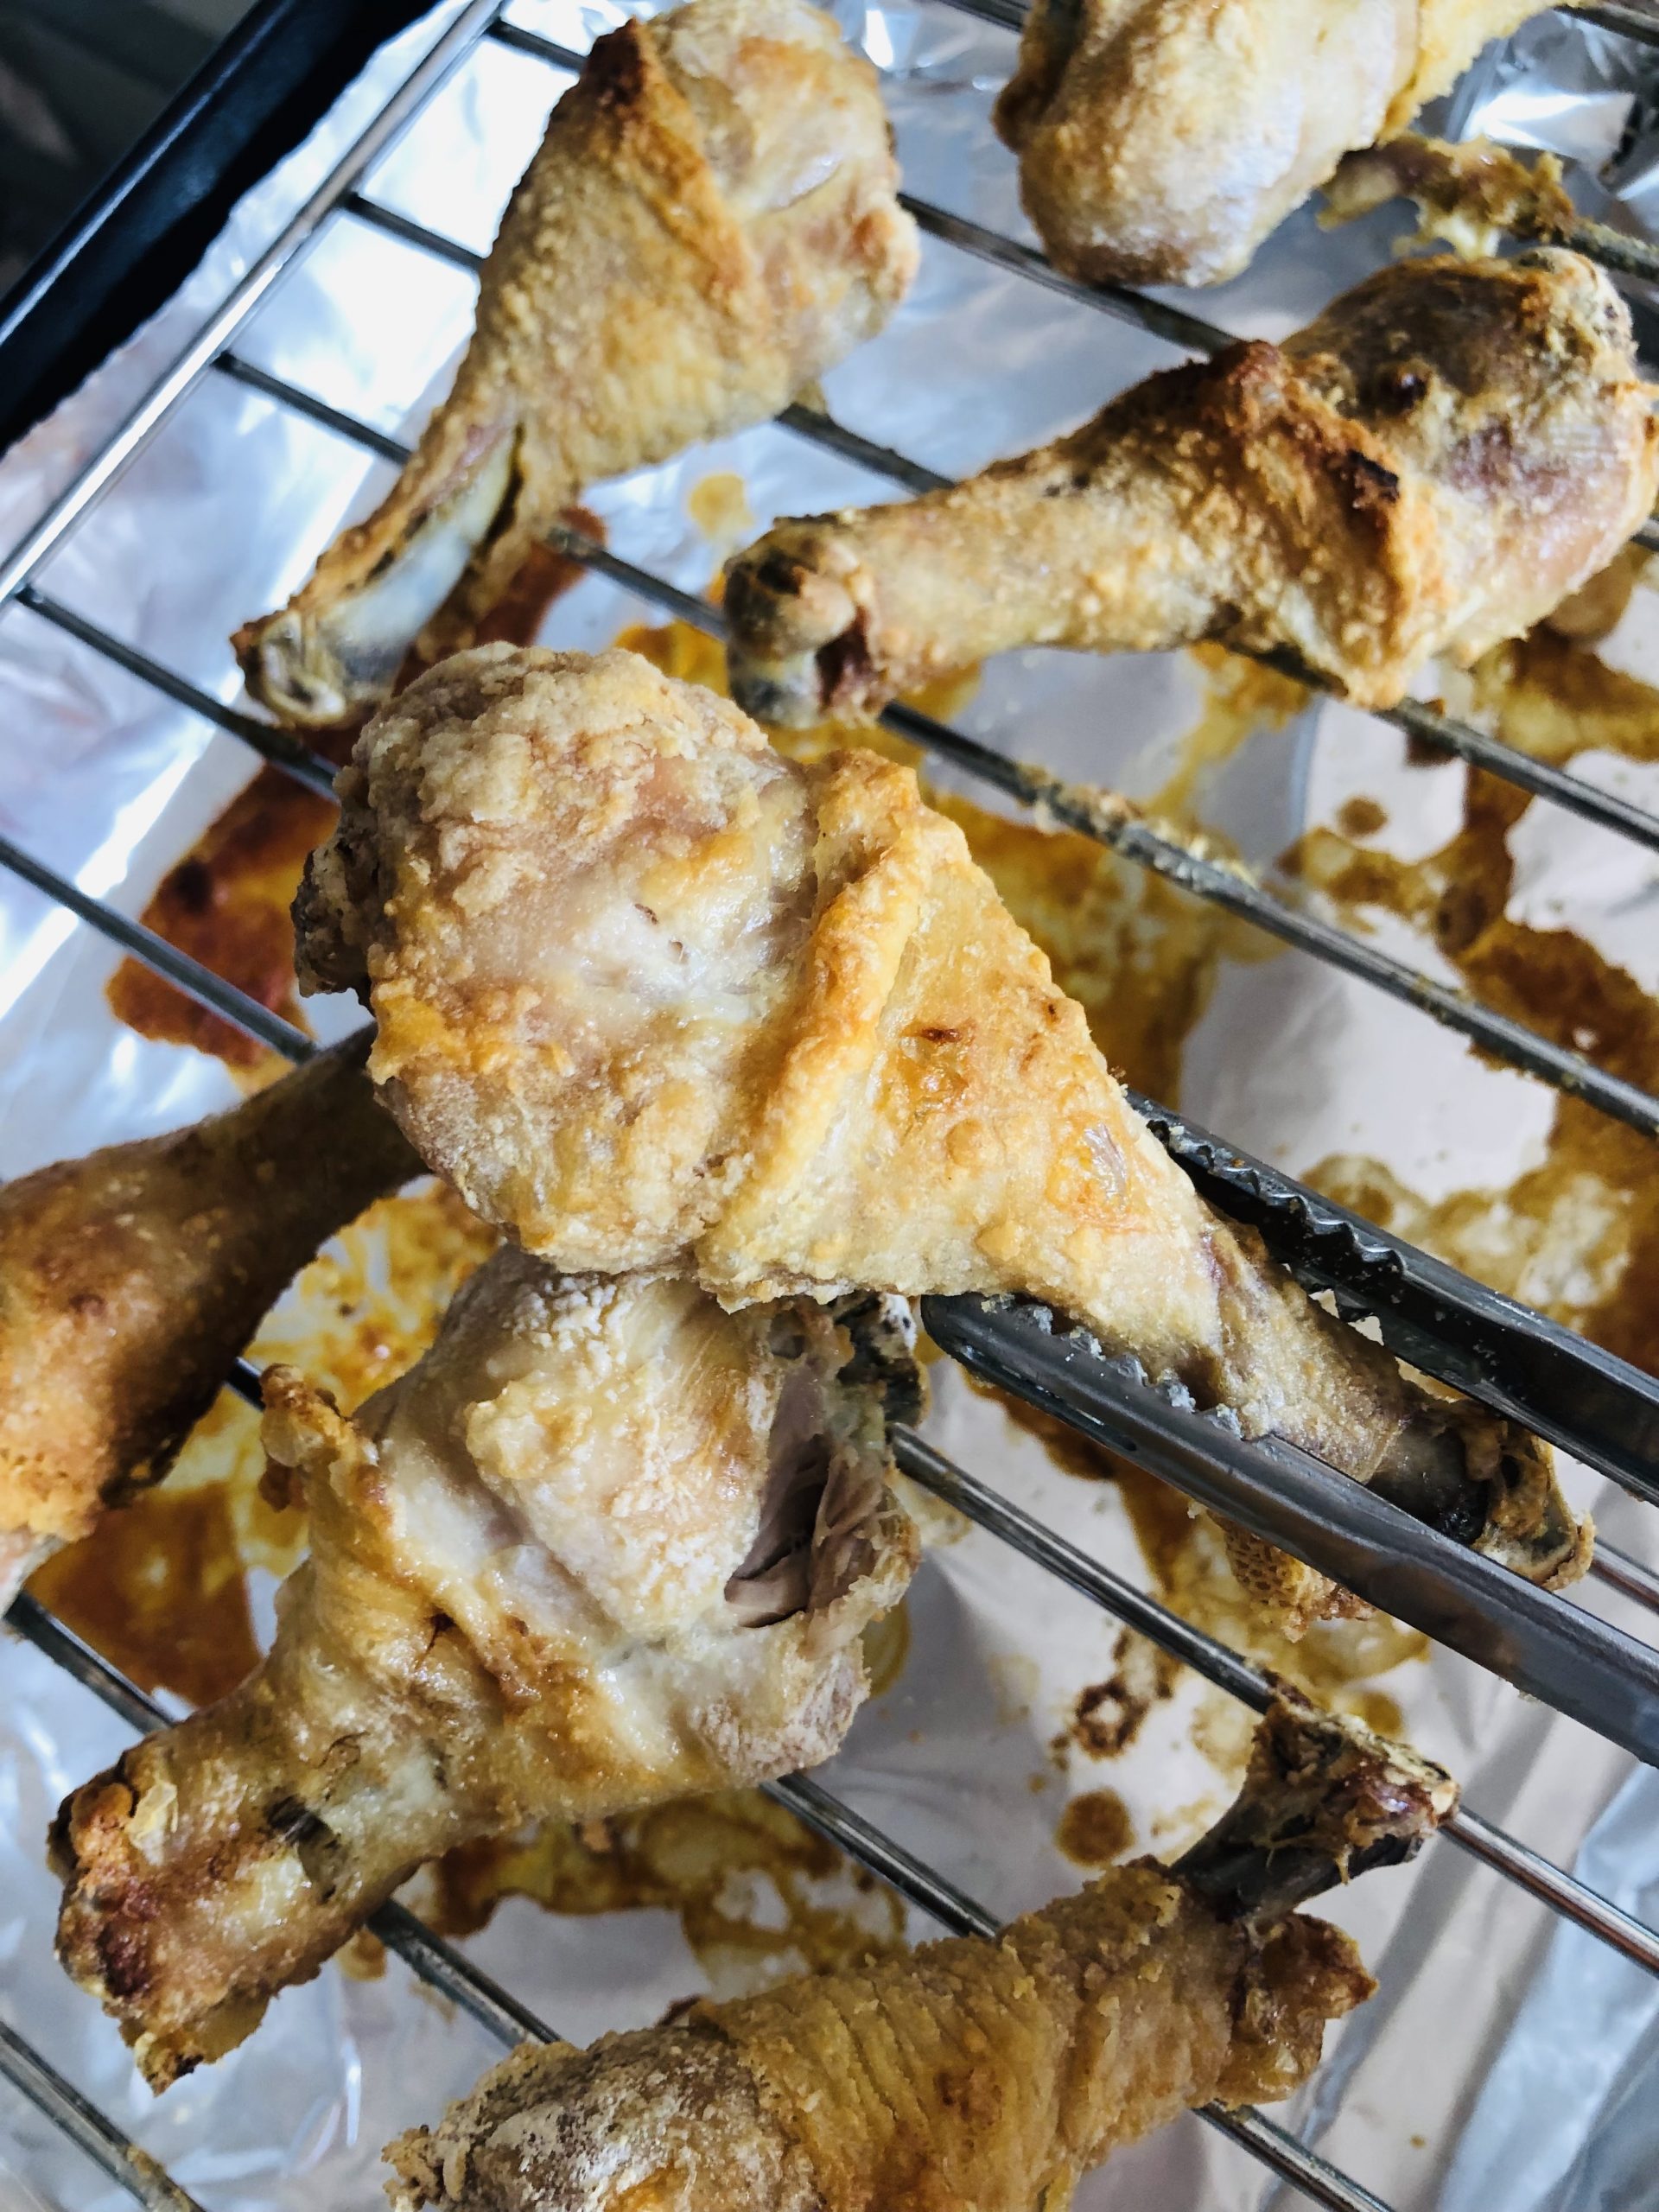 Chicken drumsticks on a wire rack that have been cooked with crispy skin one drumstick being held by tongs closeup.